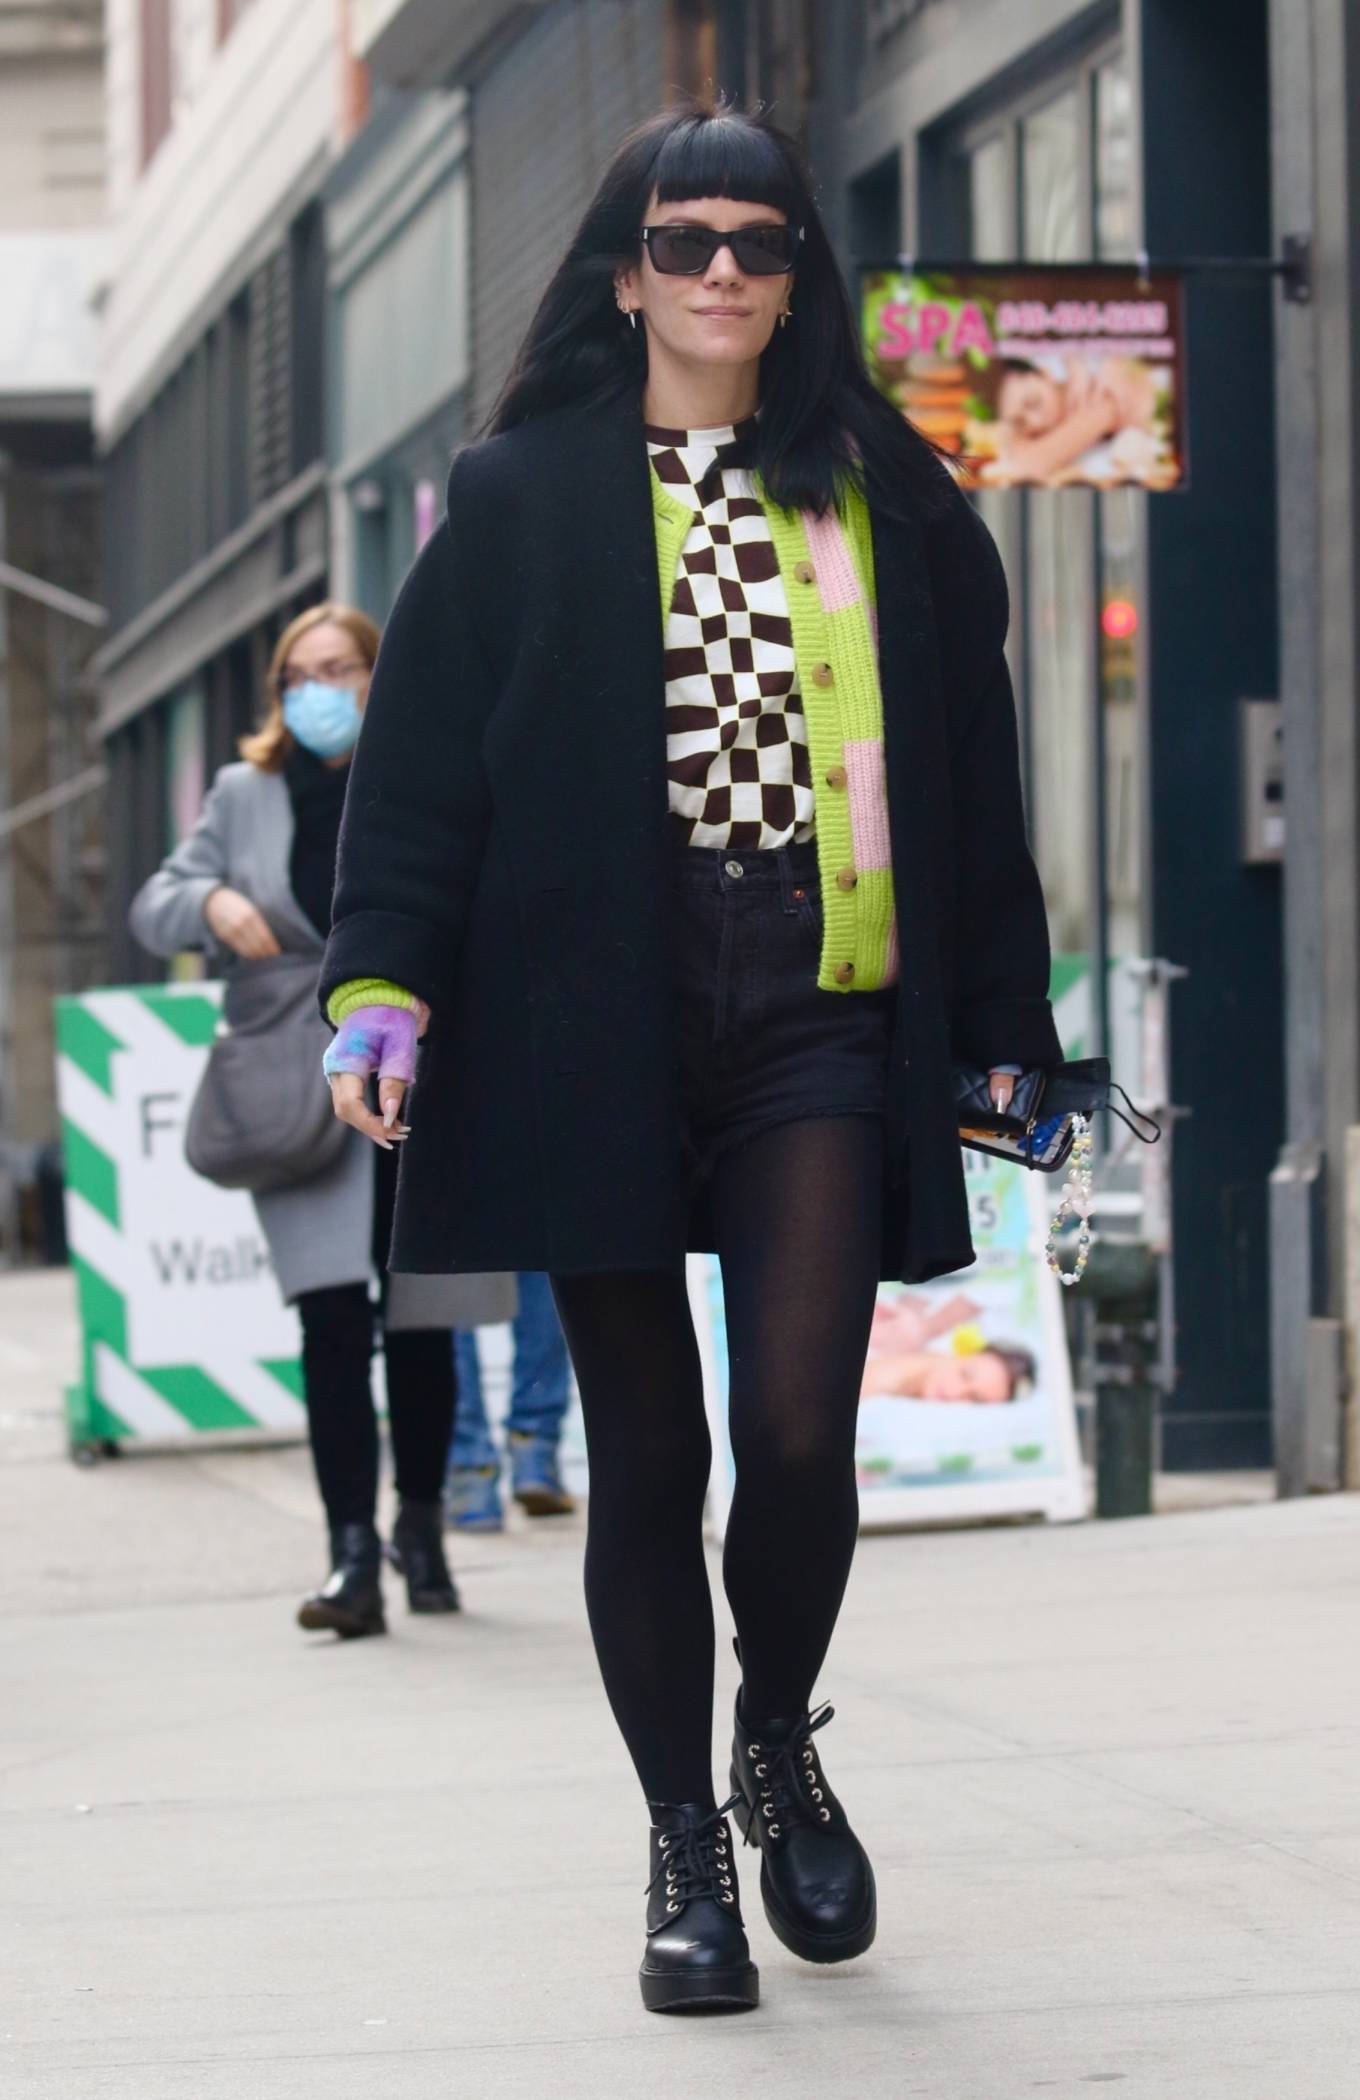 Lily Allen - In a green patterned sweater out in Manhattan